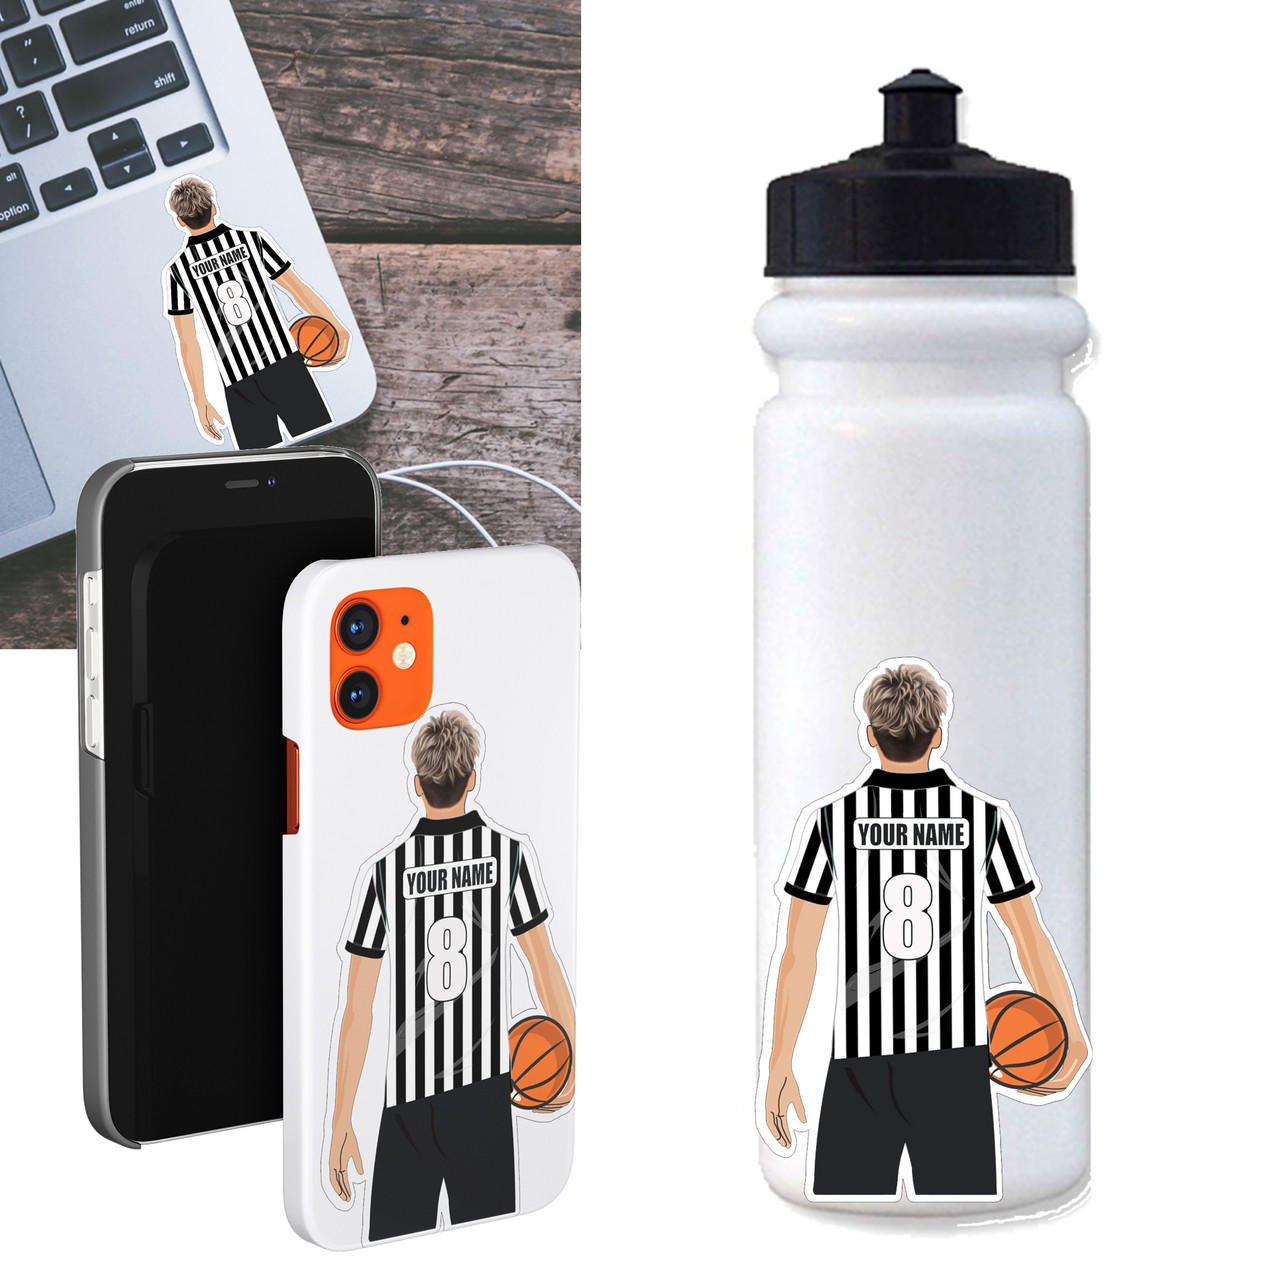 Personalized Basketball Referee Sticker Questions & Answers